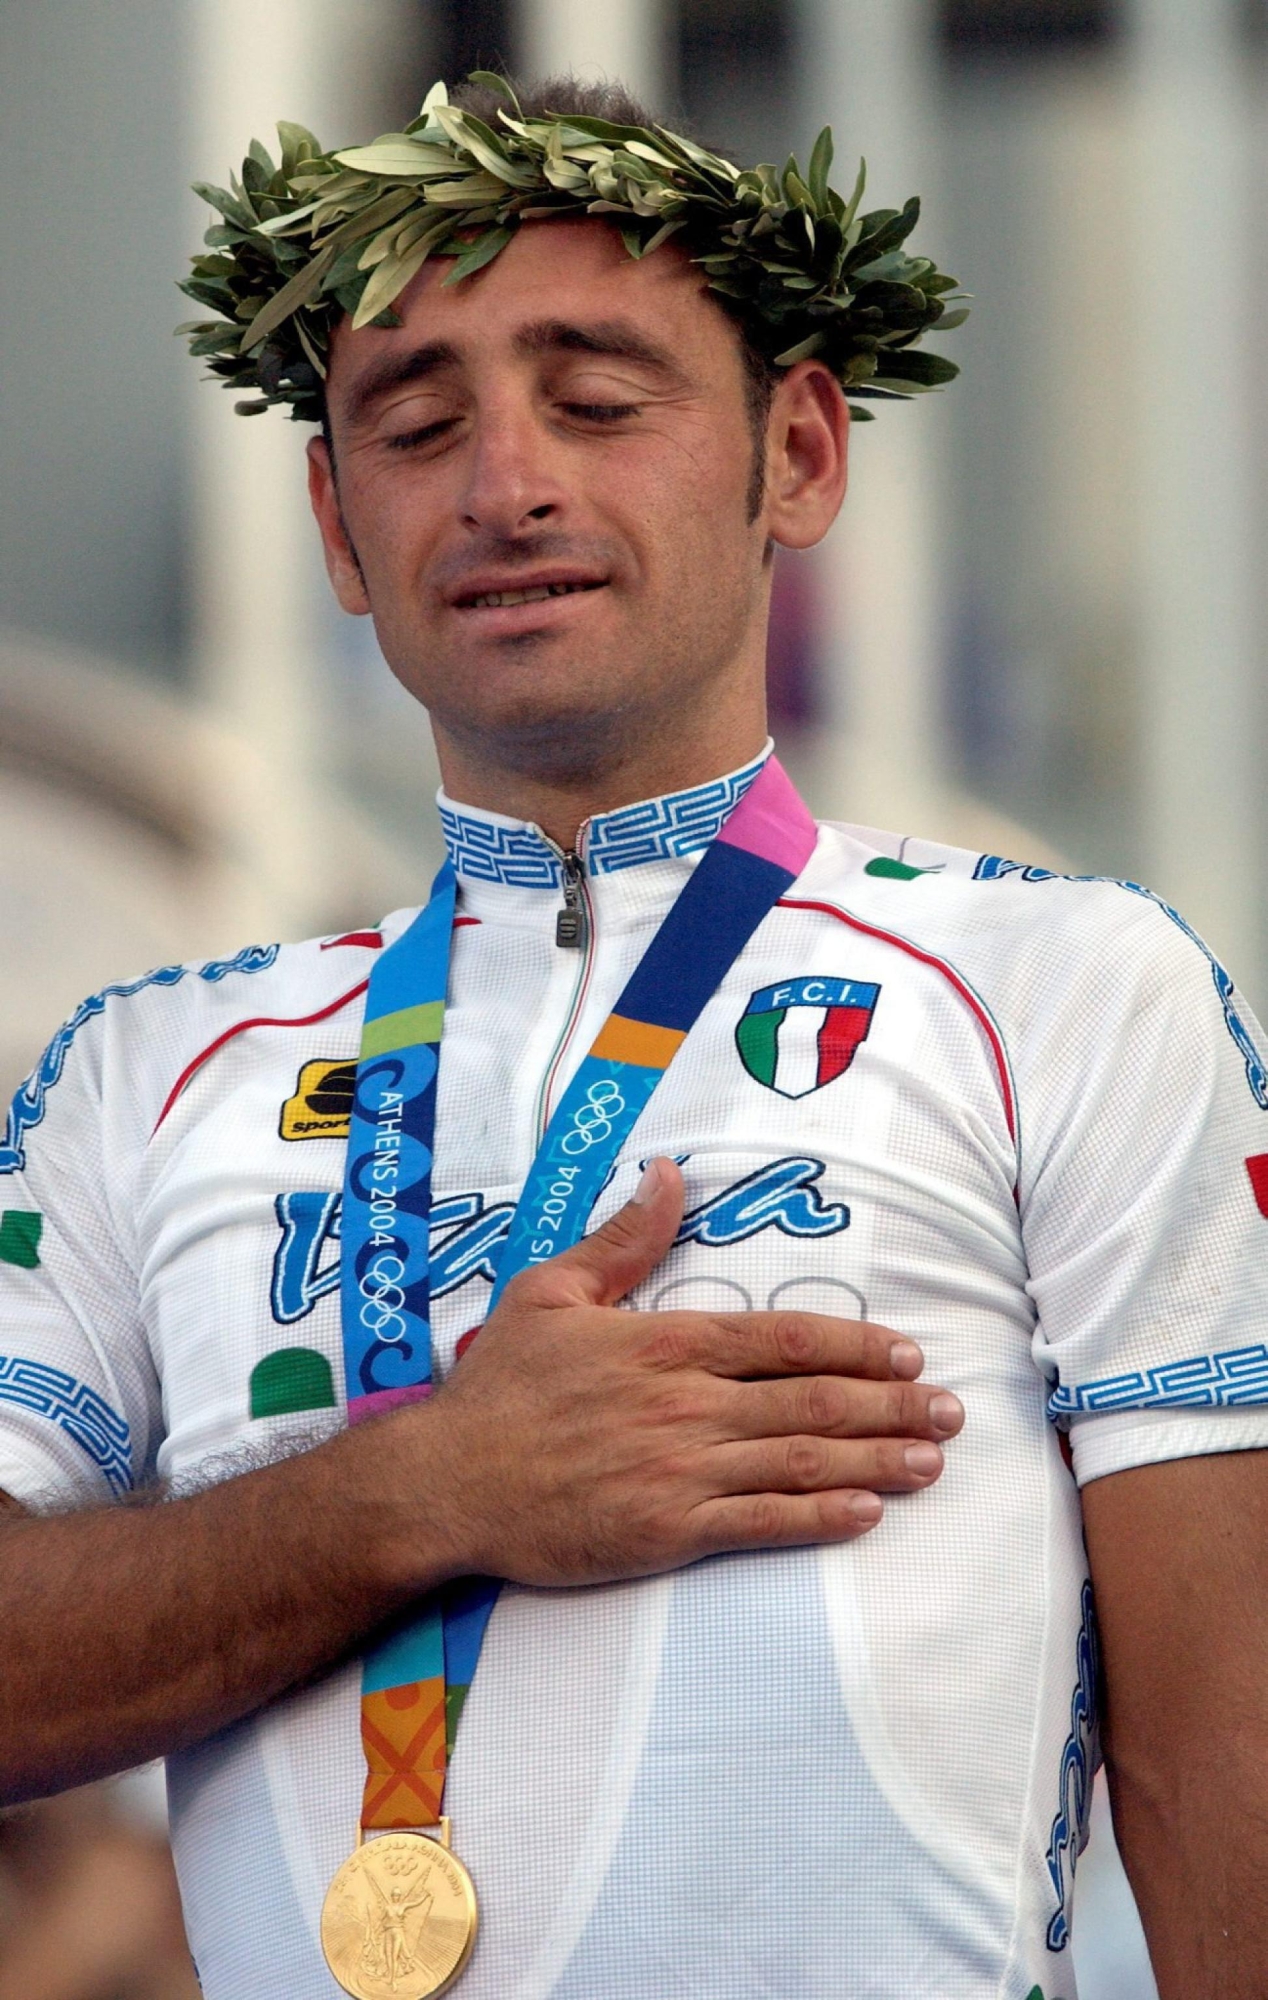 ATENE 2004:BETTINI;IL SALTO DEL 'GRILLO',DA GREGARIO ALL'ORO. Paolo Bettini from Italy reacts during the medal ceremony after winning the Olympic Street Race of Athens, Saturday 14 August 2004.  Bettini won gold, Portugal`s Sergio Paulinho  silver,  Axel Merckx from Belgium won bronze. ANSA - Peer Grimm - KRZ